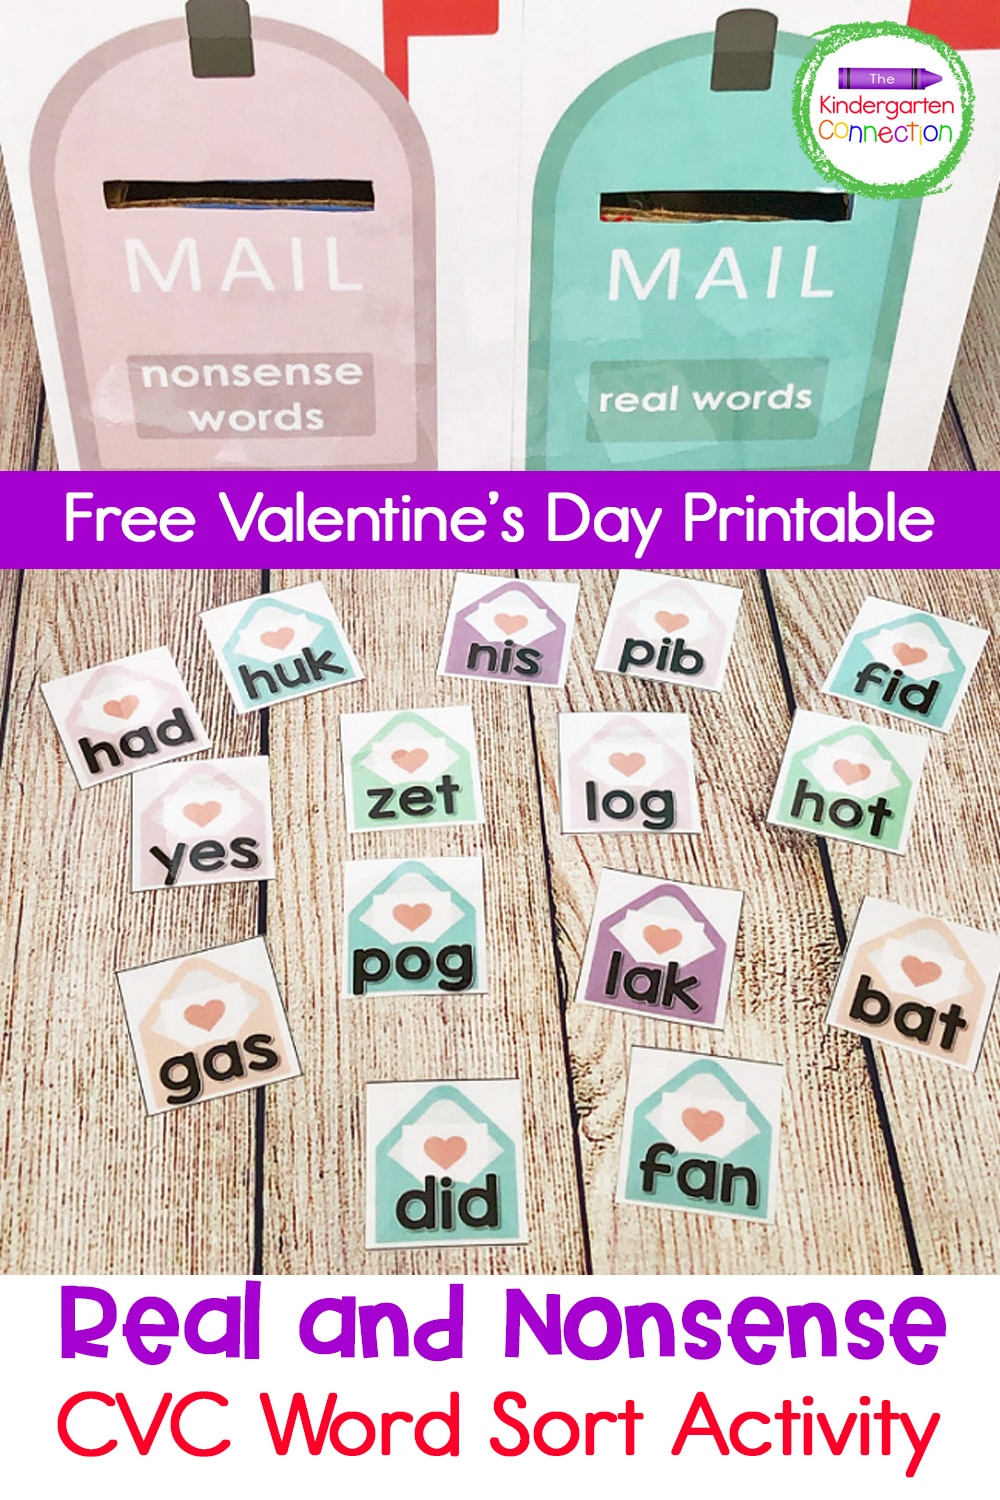 Grab our FREE Printable Valentine's Day Real and Nonsense CVC Word Sort Activity for your Kindergarten literacy centers this February!